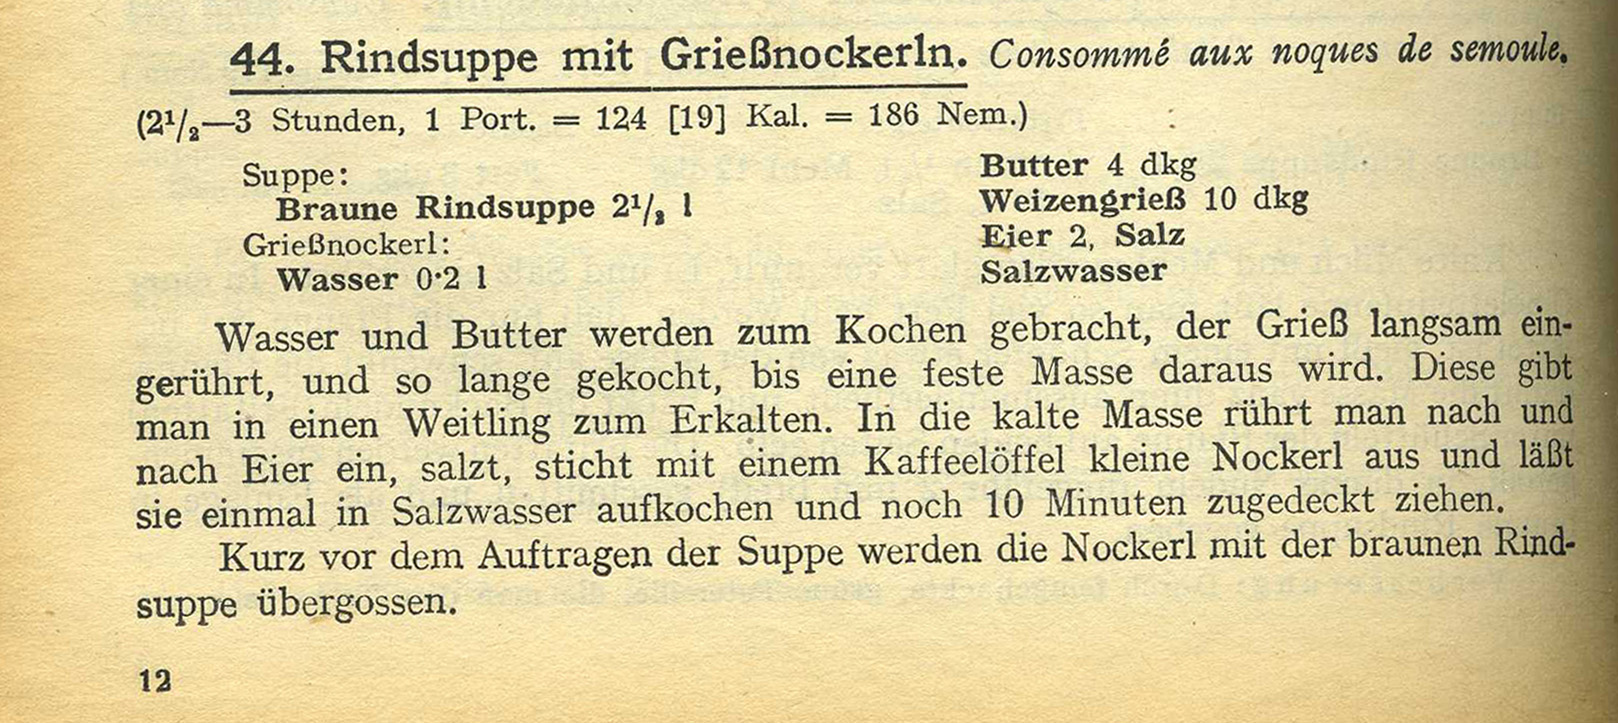 Made with beef broth and dumplings, Griessnockerlsuppe was served often by Grete Bibring.